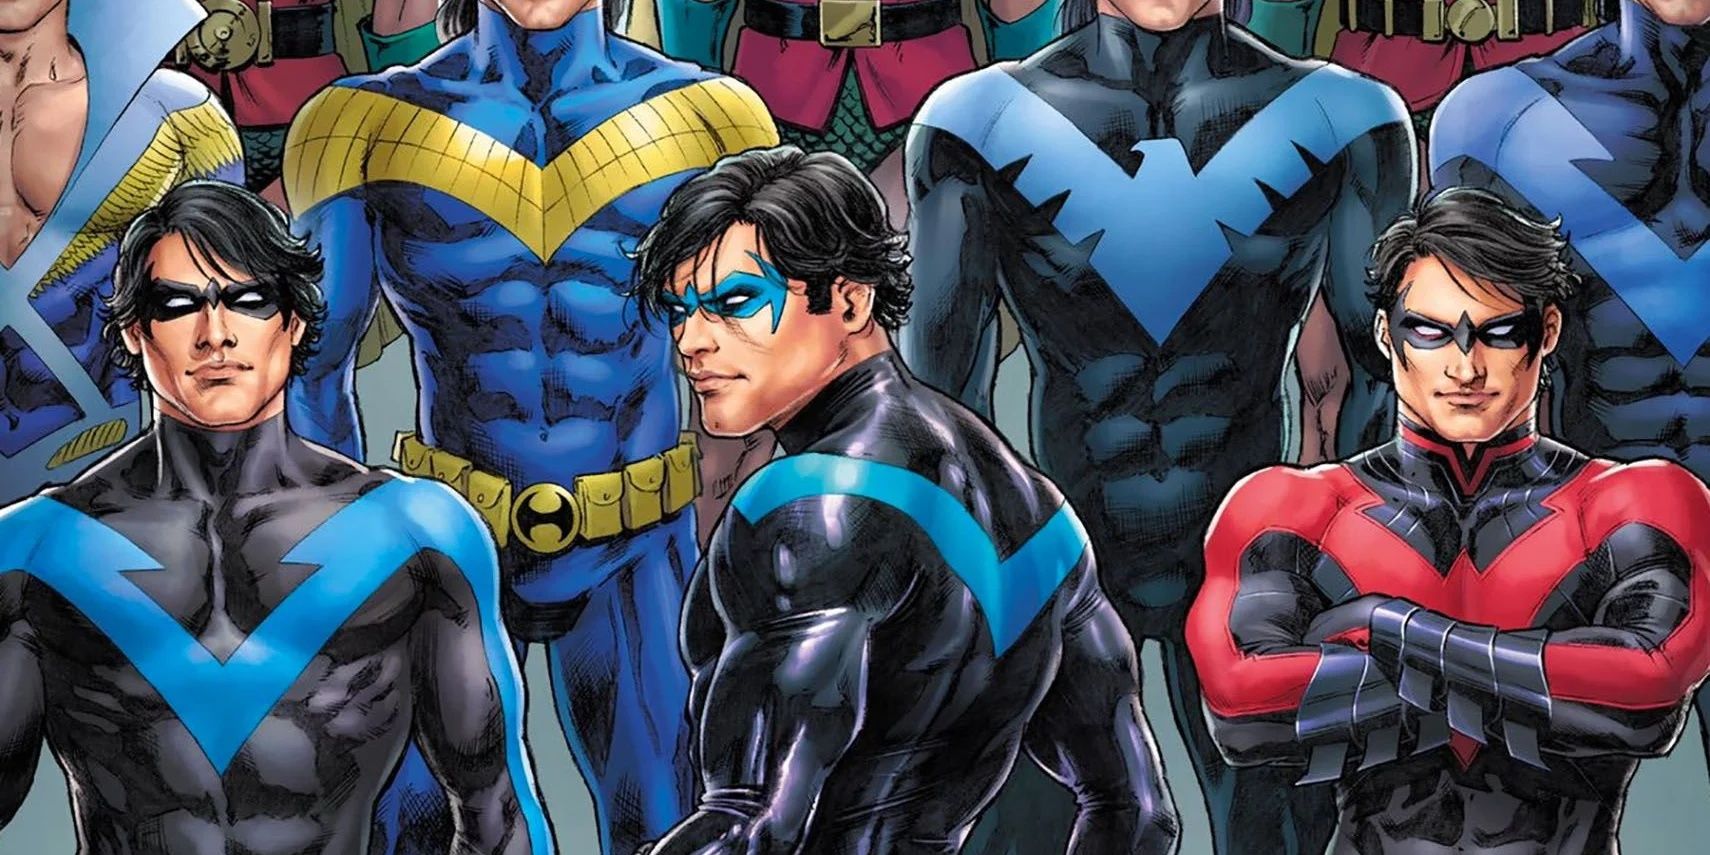 Nightwing surrounded by past versions of himself from DC Comics